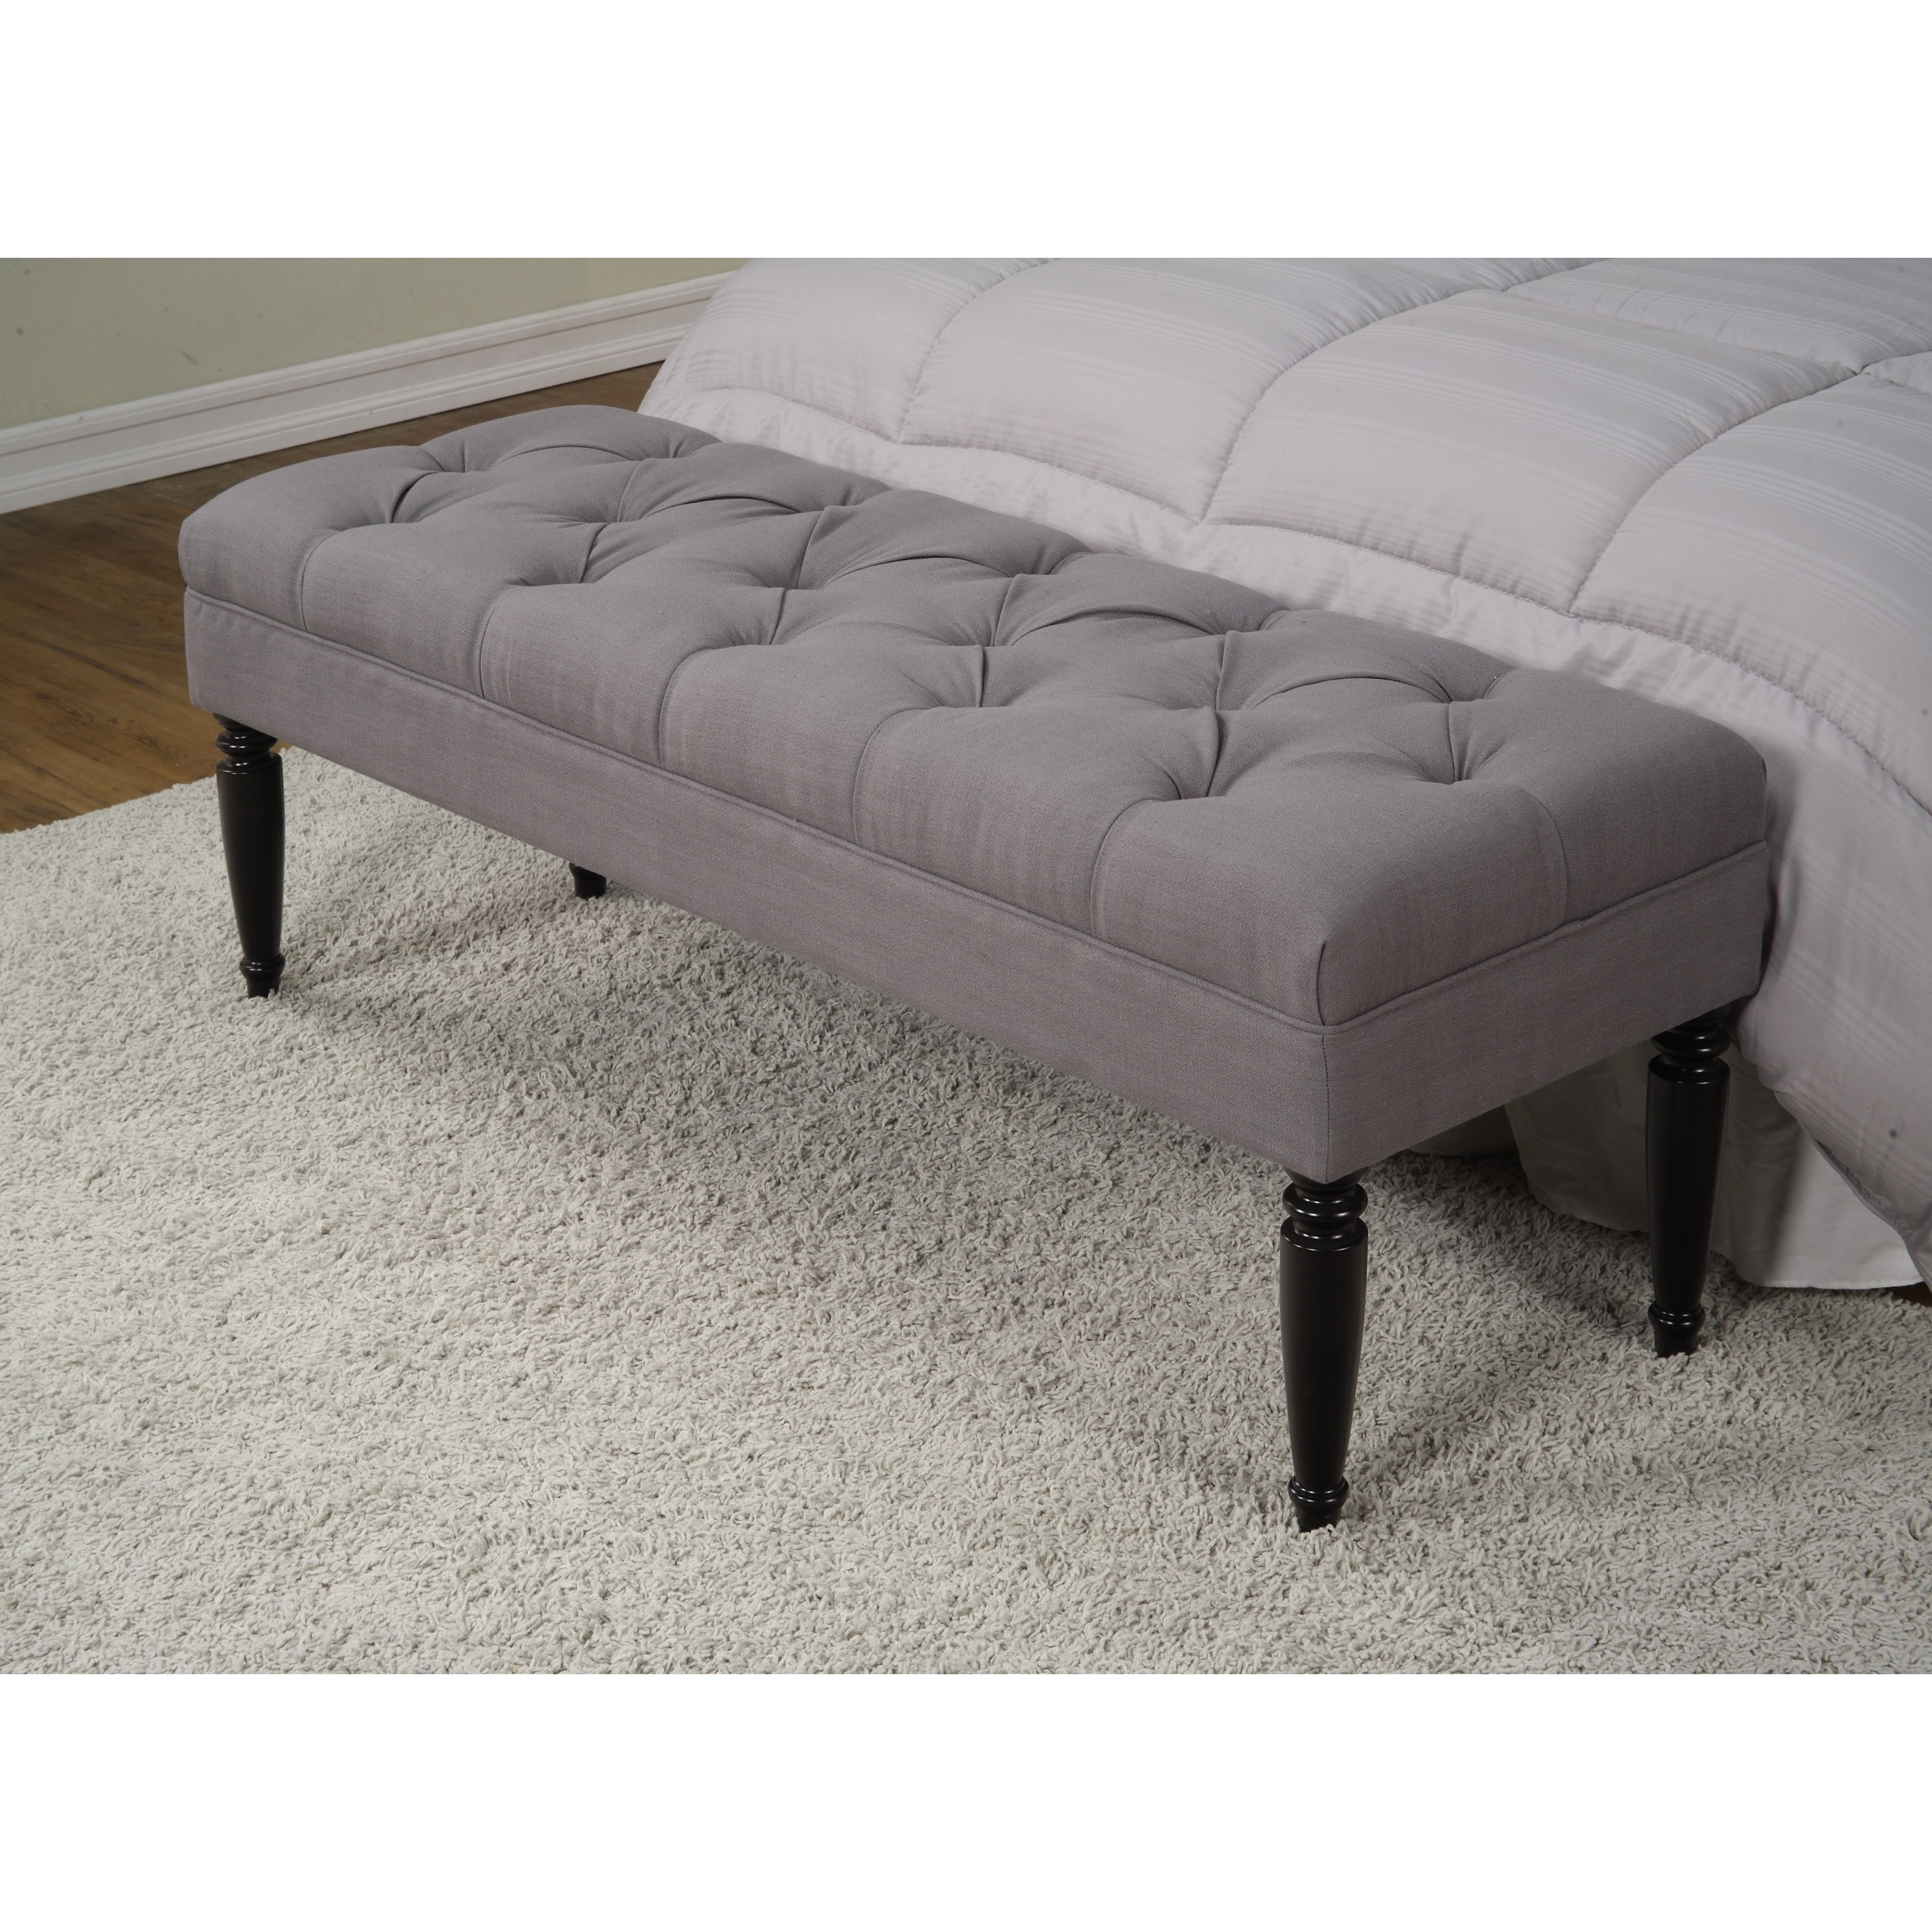 Claudia Diamond Wale Grey Tufted Bench Overstock 9249298